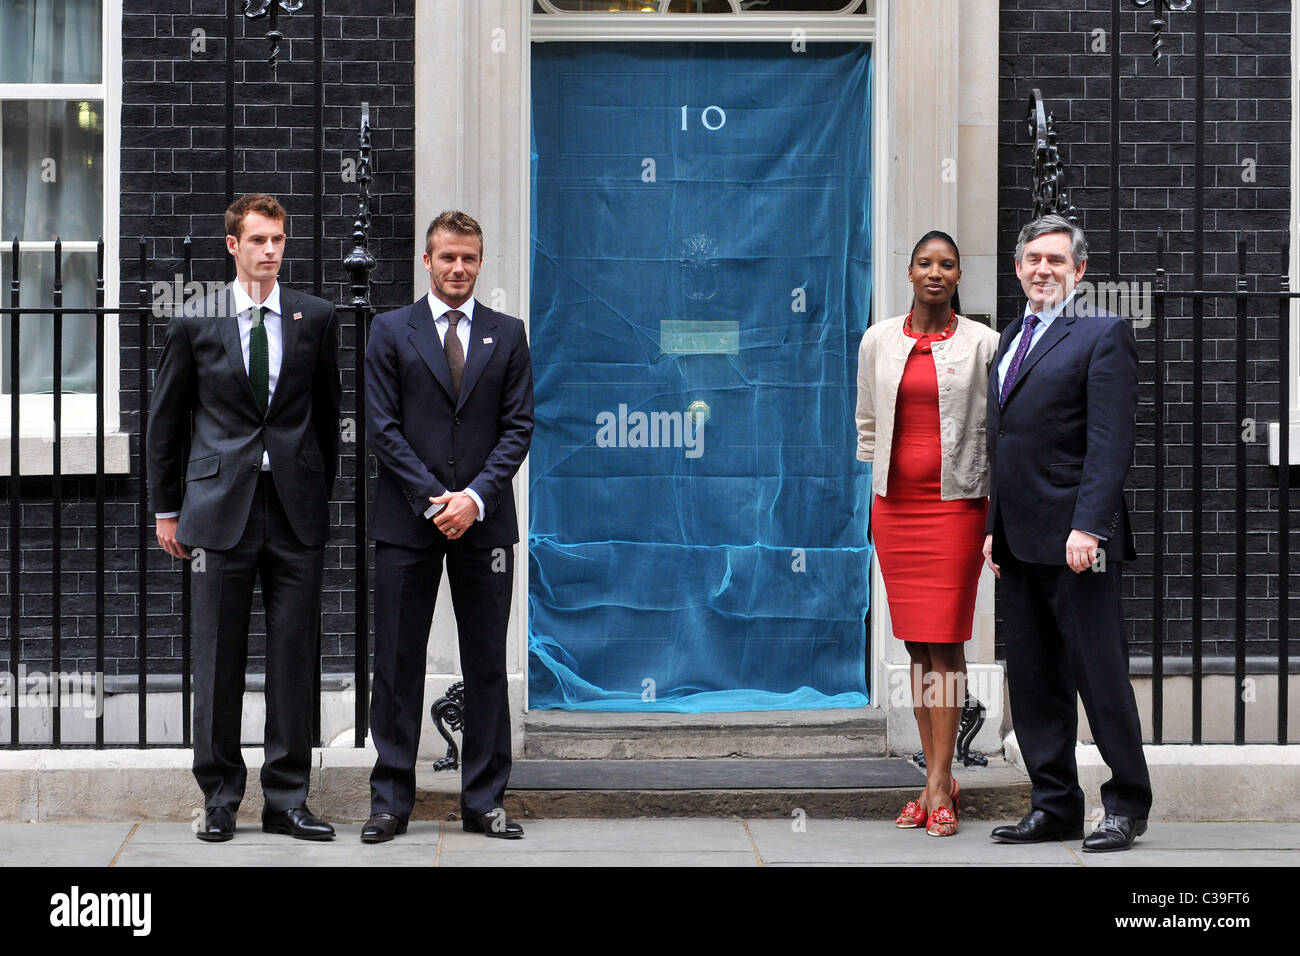 ¿Cuánto mide Andy Murray? - Altura - Real height David-beckham-andy-murray-and-denise-lewis-visiting-prime-minister-C39FT6